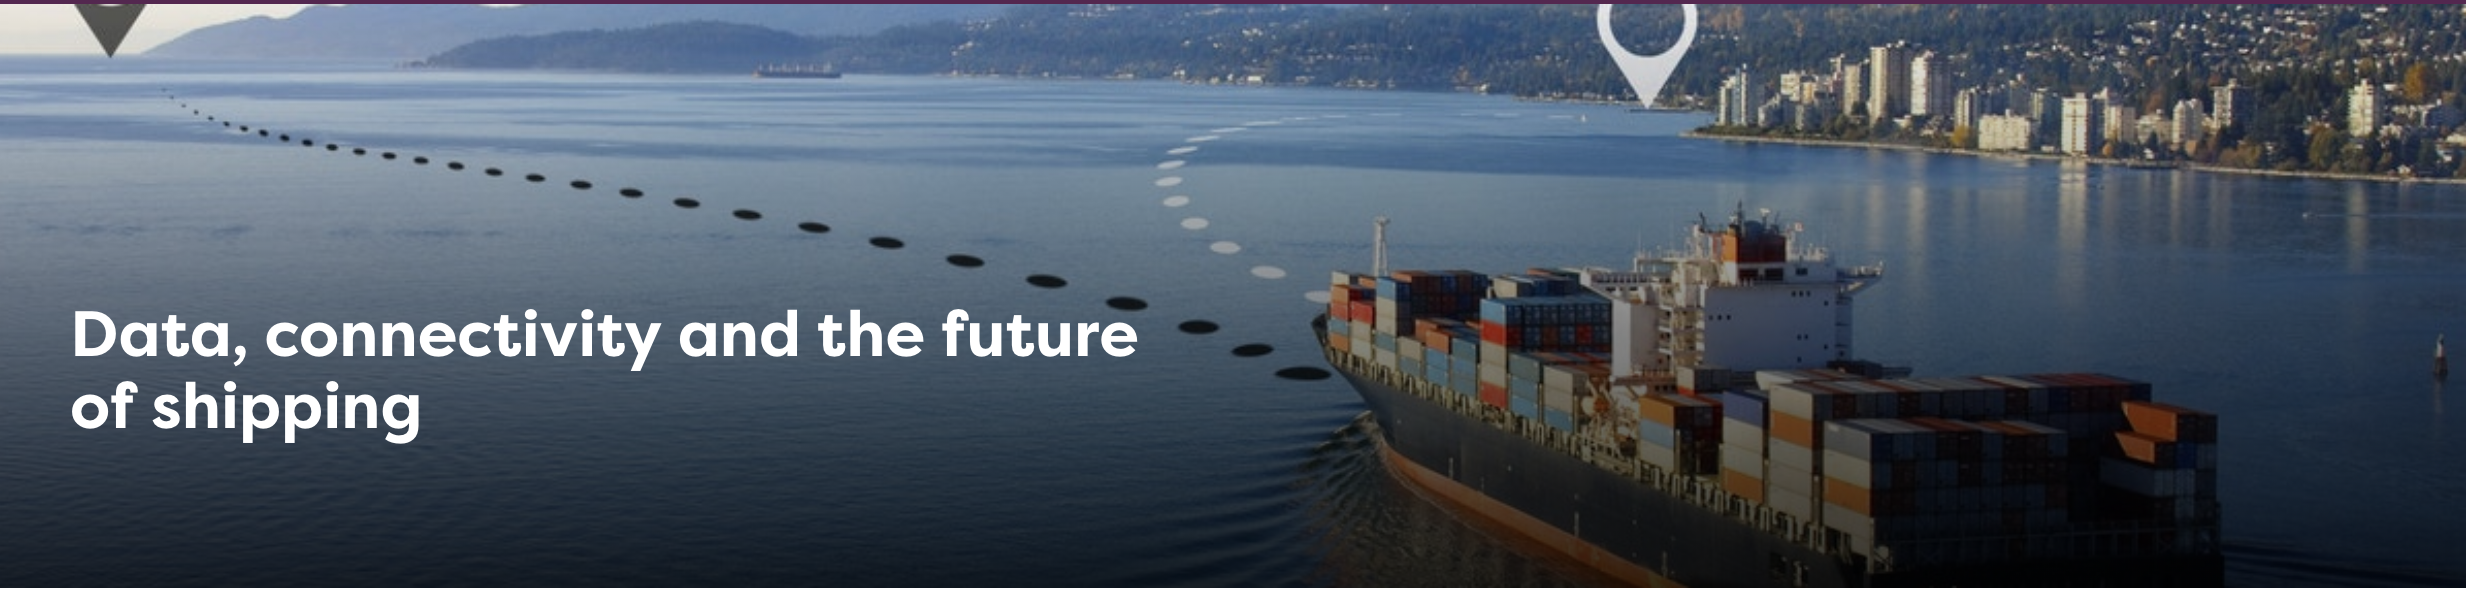 Data, connectivity and the future of shipping